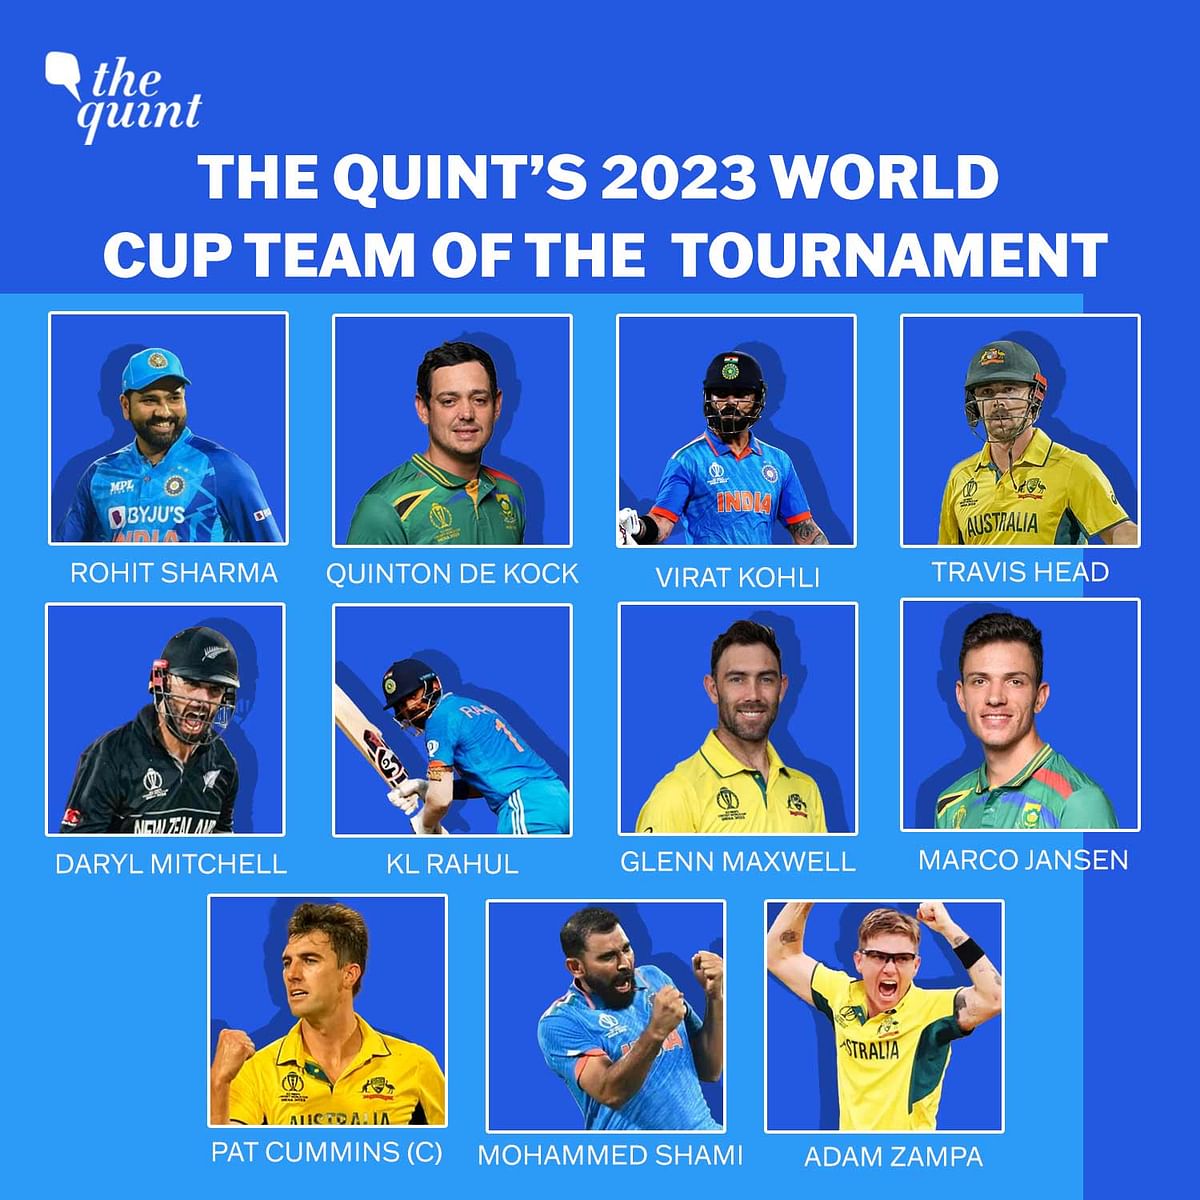 #CWC23 had numerous tales of gallantry which enthralled cricket fans. Presenting @TheQuint's team of the tournament: